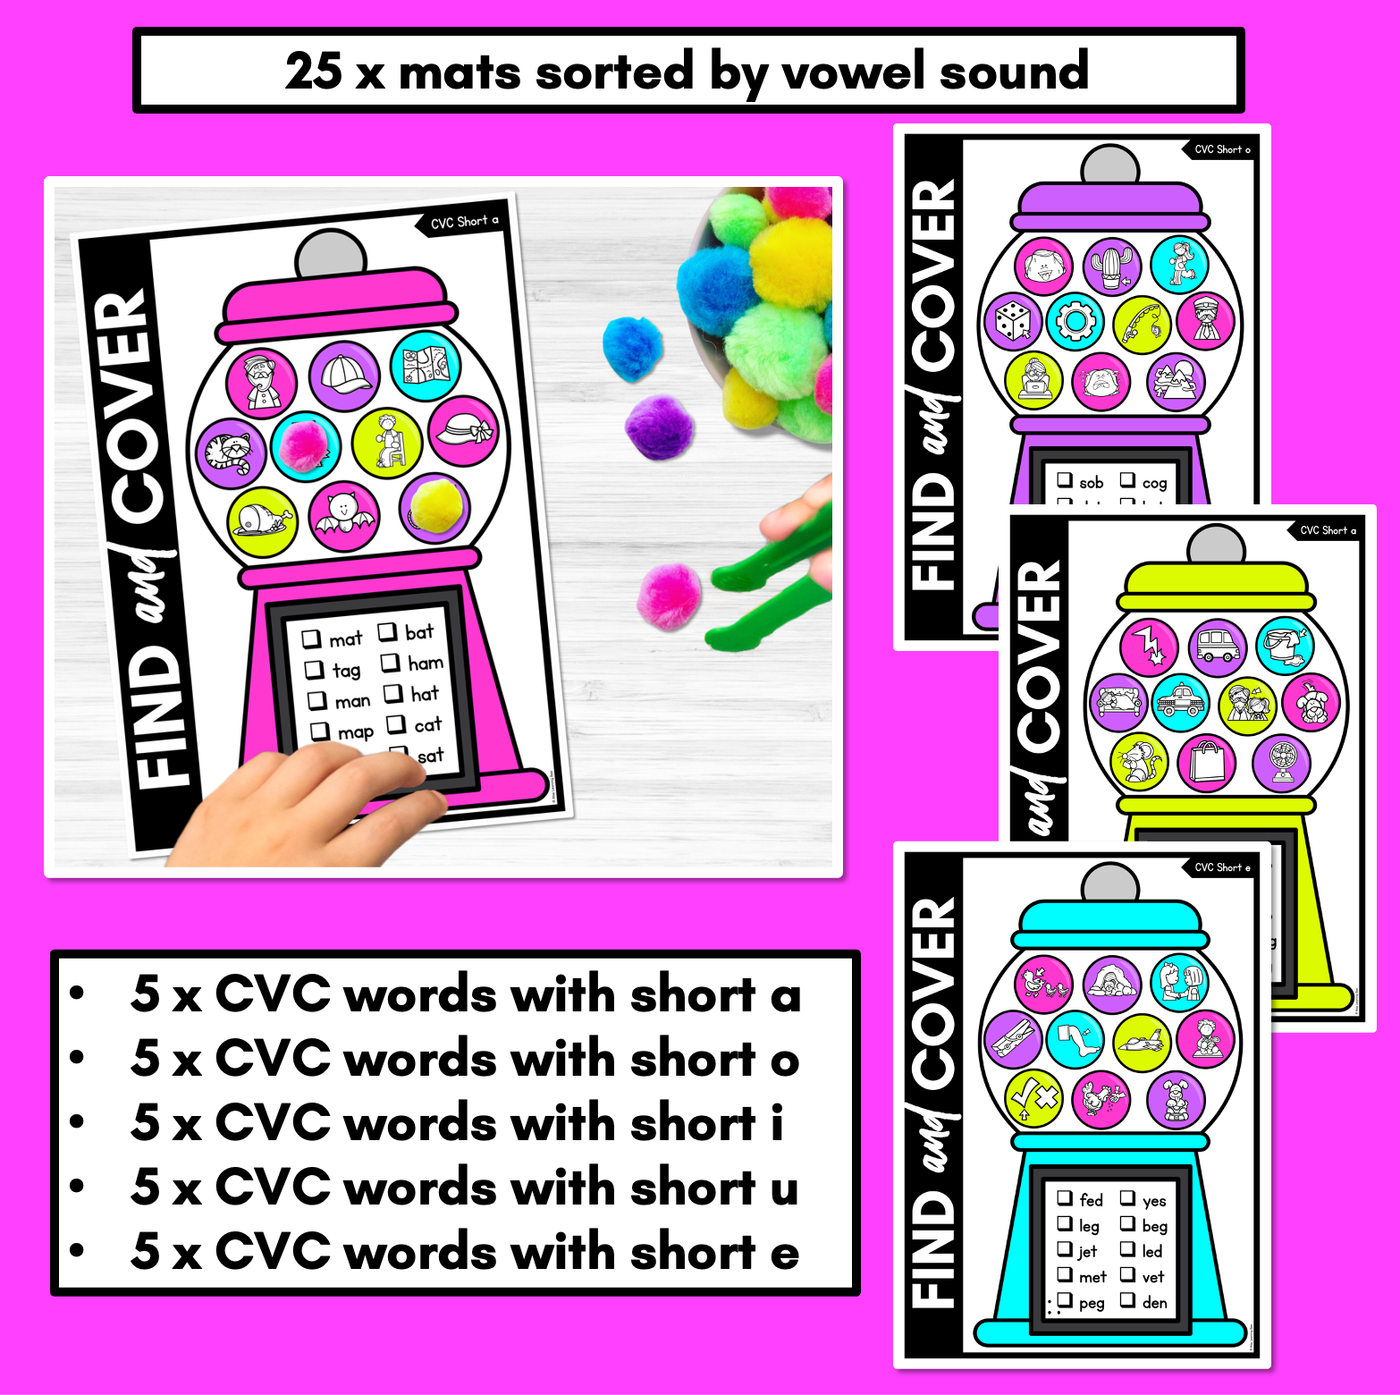 NO PREP CVC WORD GAMES - Find & Cover the CVC Words - GUMBALL GAMES